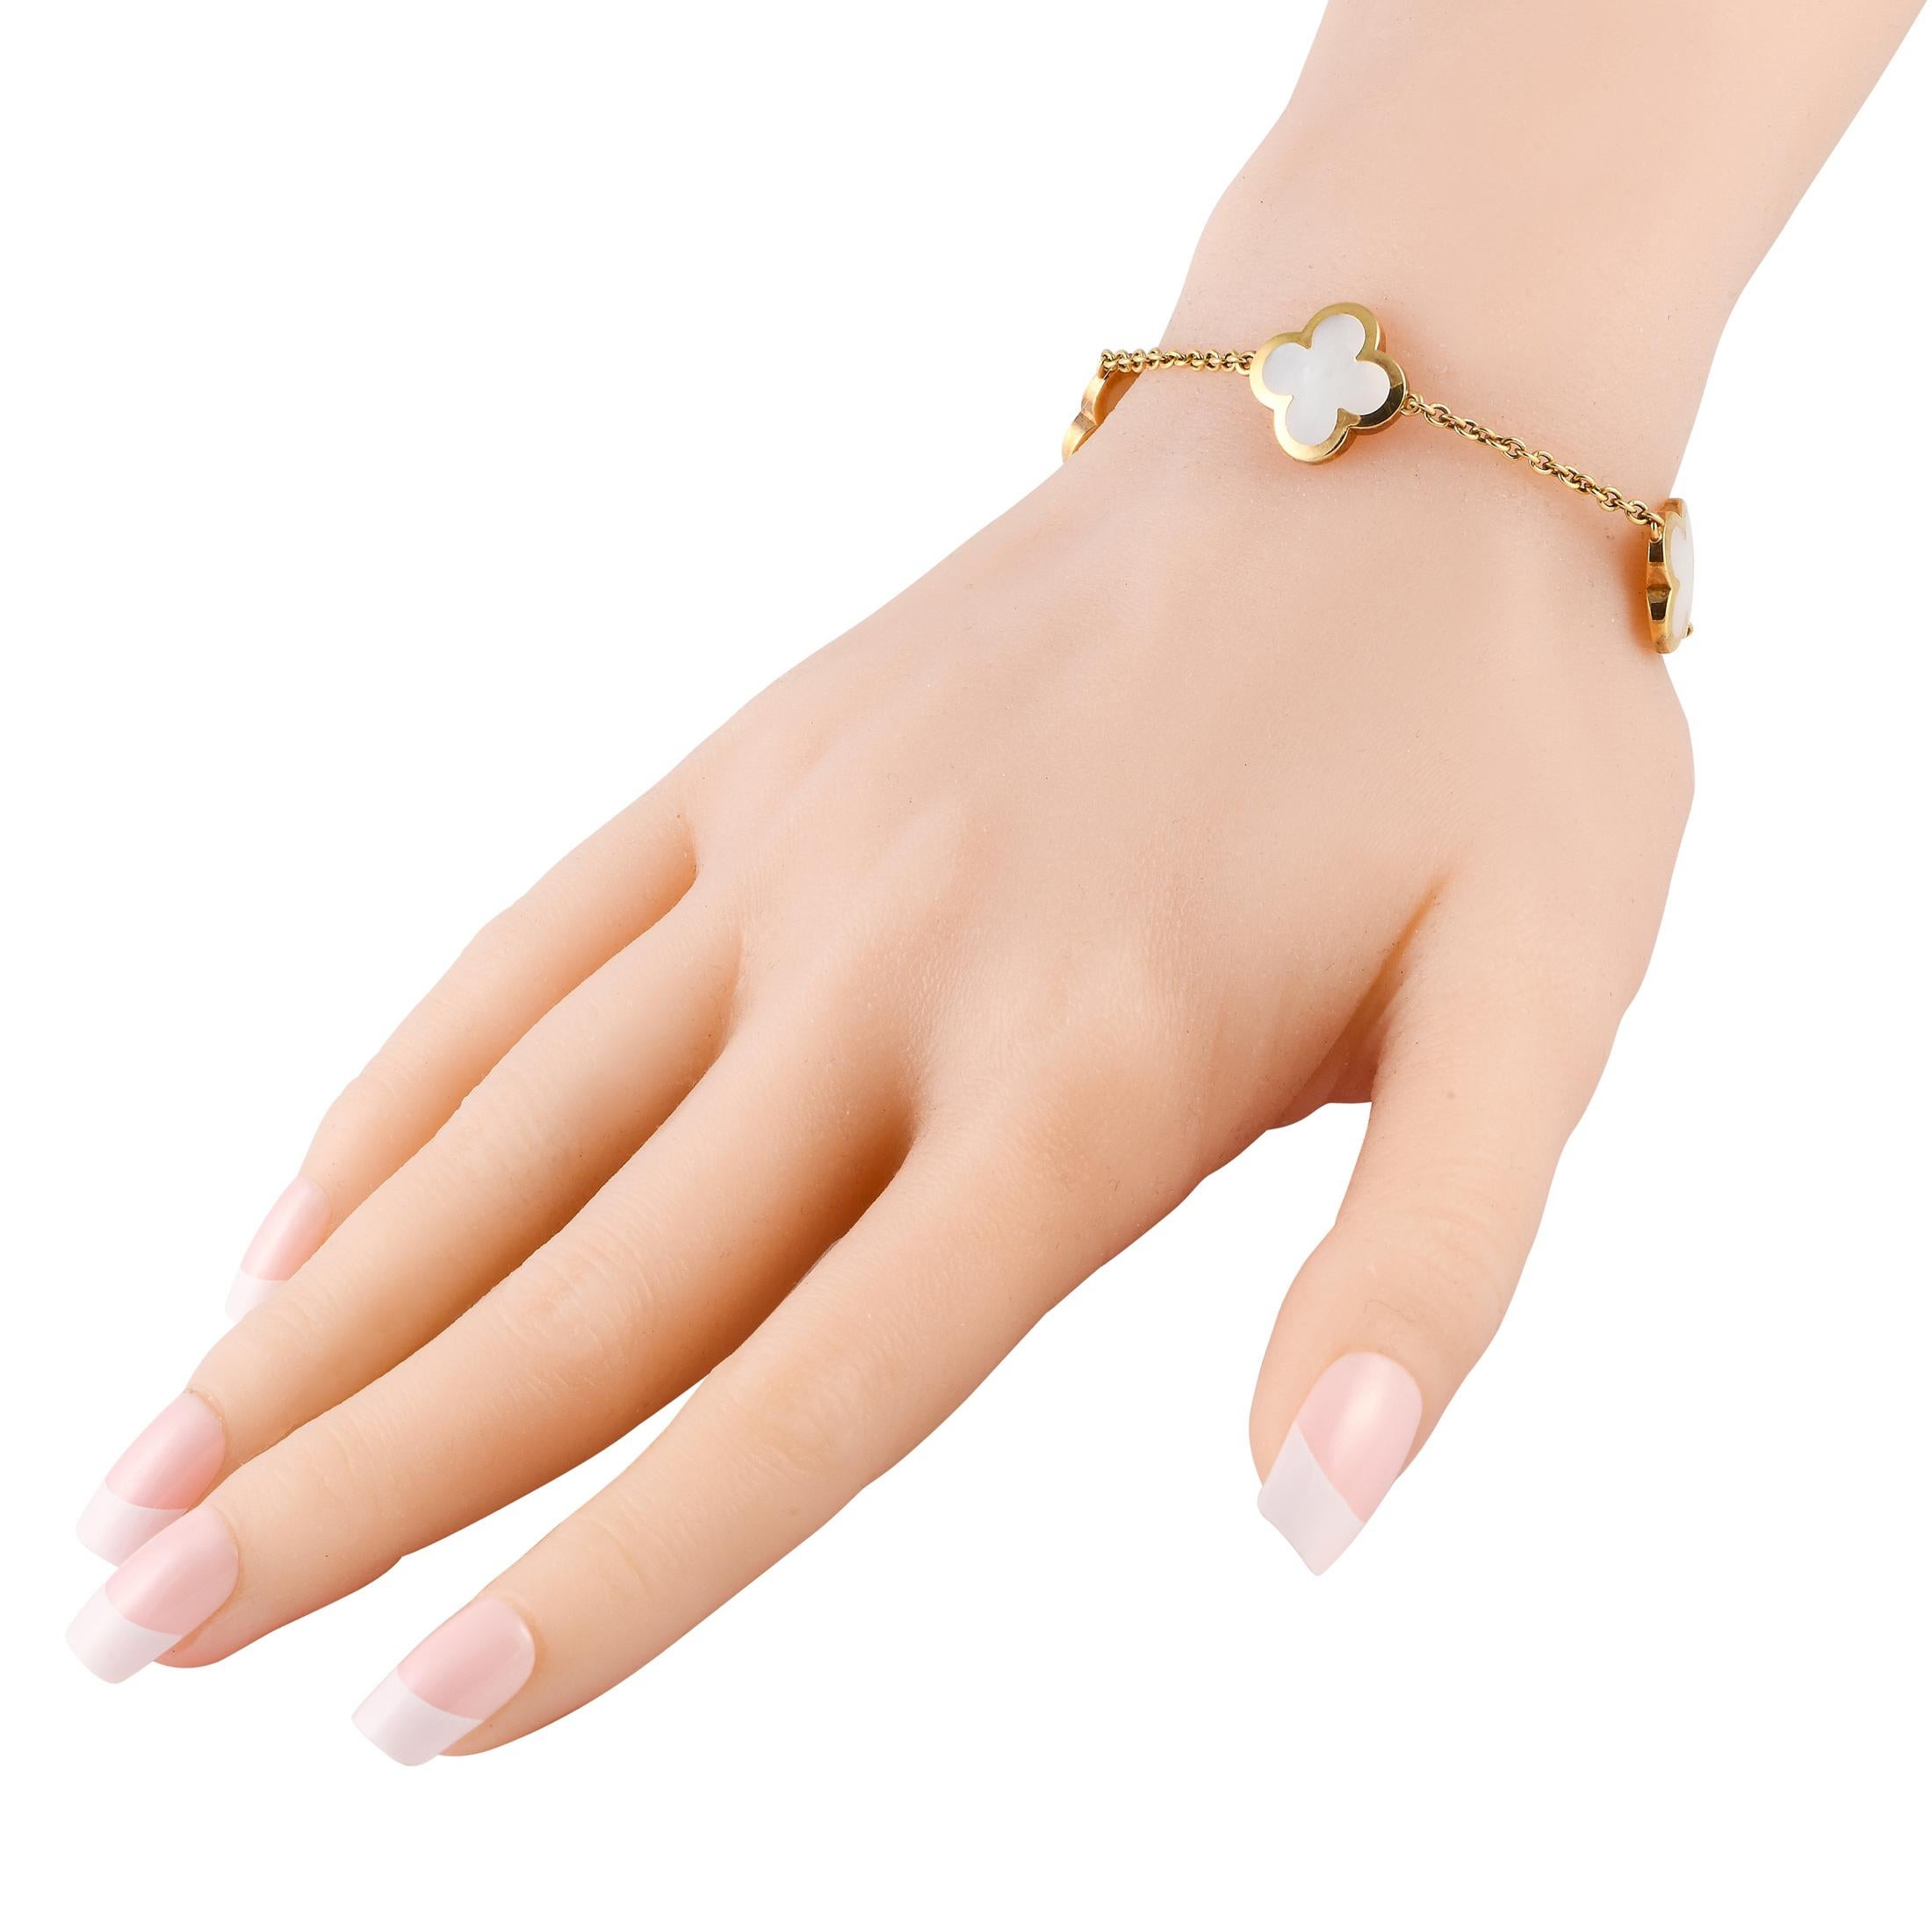 This sophisticated Van Cleef & Arpels Alhambra bracelet will never go out of style. An opulent 18K Yellow Gold chain is beautifully accented by a series of the brand’s iconic clover-shaped motifs, which are elevated by Mother of Pearl accents. This